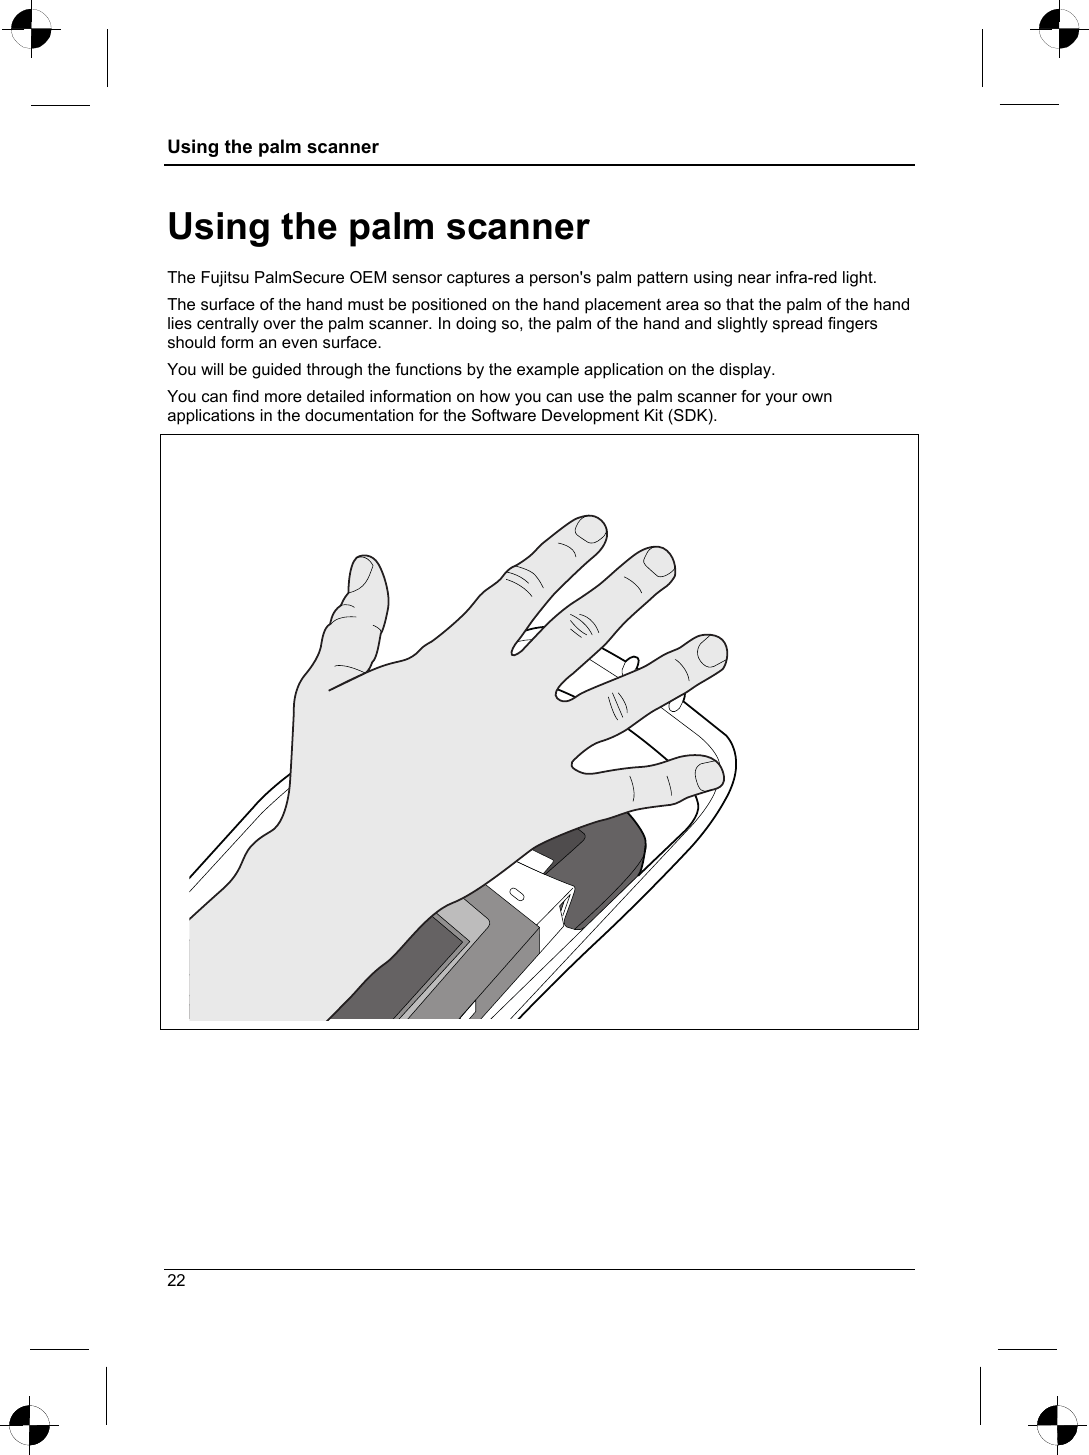 Using the palm scanner  Using the palm scanner The Fujitsu PalmSecure OEM sensor captures a person&apos;s palm pattern using near infra-red light.  The surface of the hand must be positioned on the hand placement area so that the palm of the hand lies centrally over the palm scanner. In doing so, the palm of the hand and slightly spread fingers should form an even surface. You will be guided through the functions by the example application on the display. You can find more detailed information on how you can use the palm scanner for your own applications in the documentation for the Software Development Kit (SDK).   22 